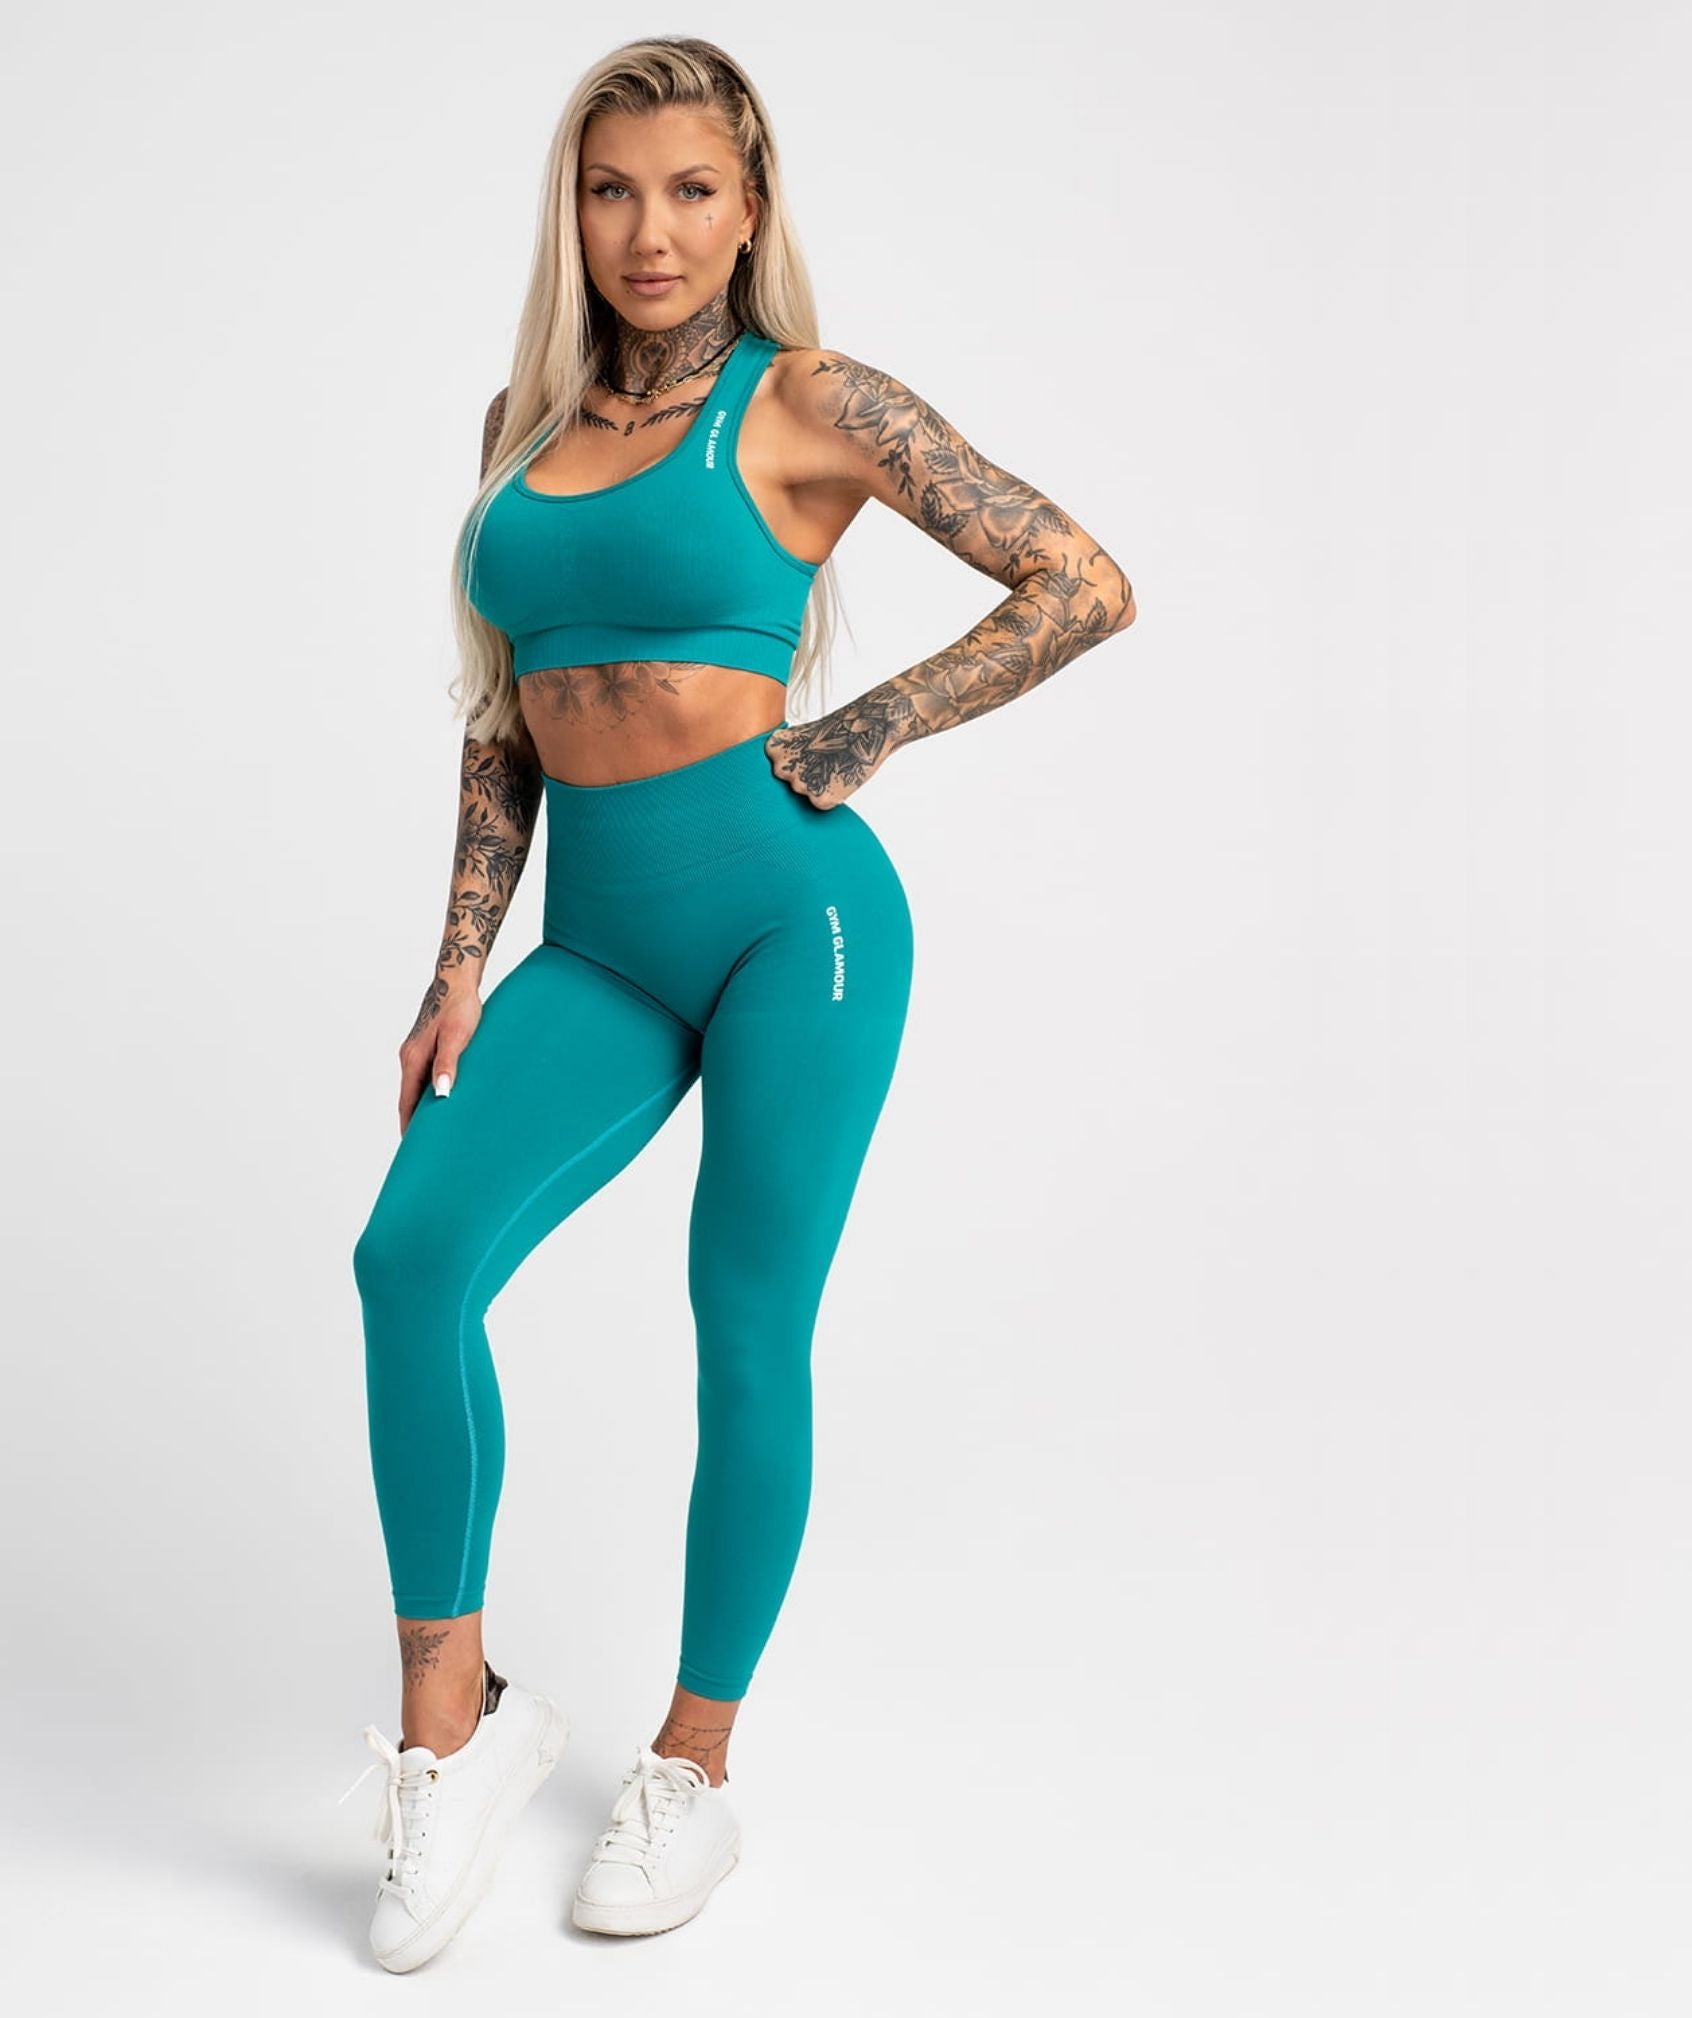 Gym Glamour - May Compress Leggings (Juicy Jungle)